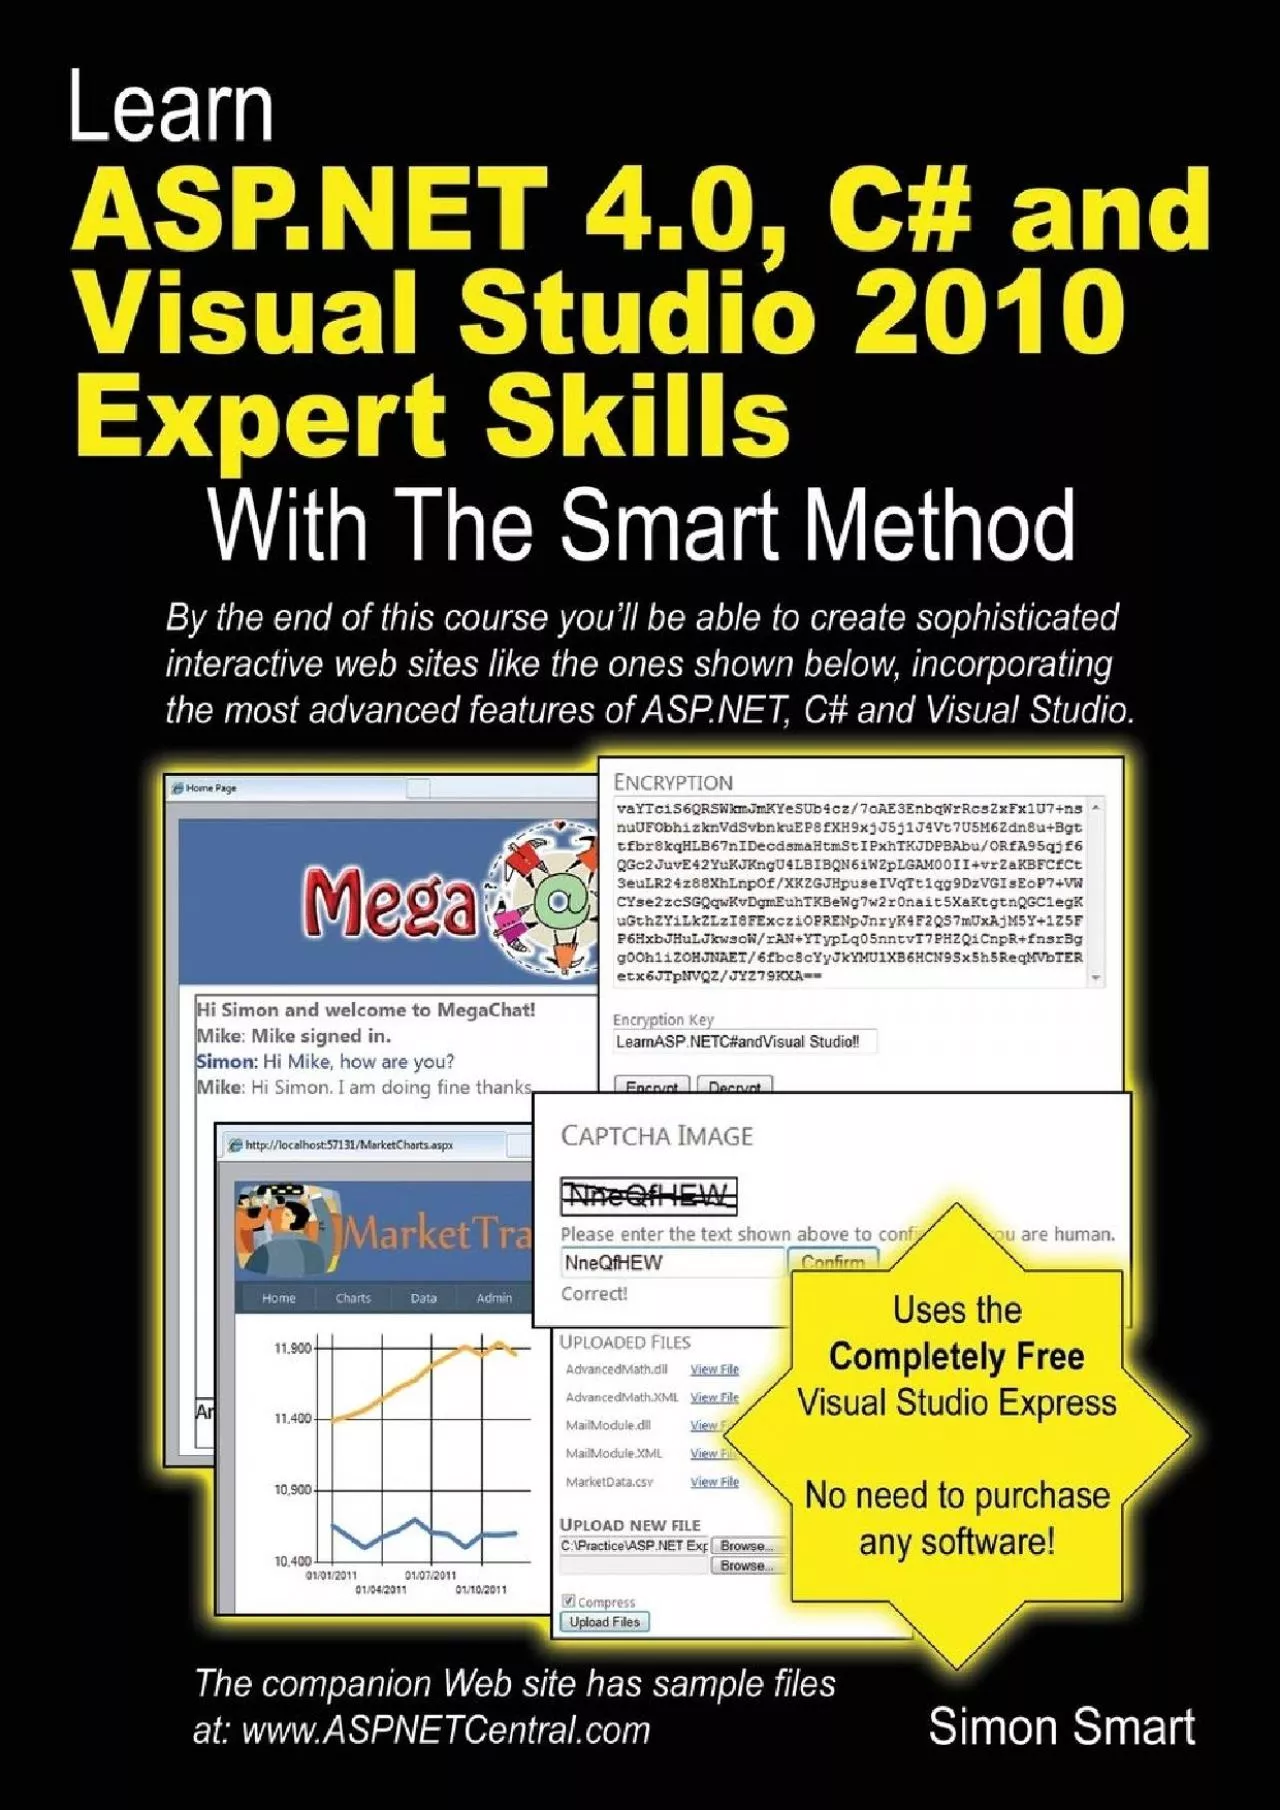 [PDF]-Learn ASP.NET 4.0, C and Visual Studio 2010 Expert Skills with The Smart Method: